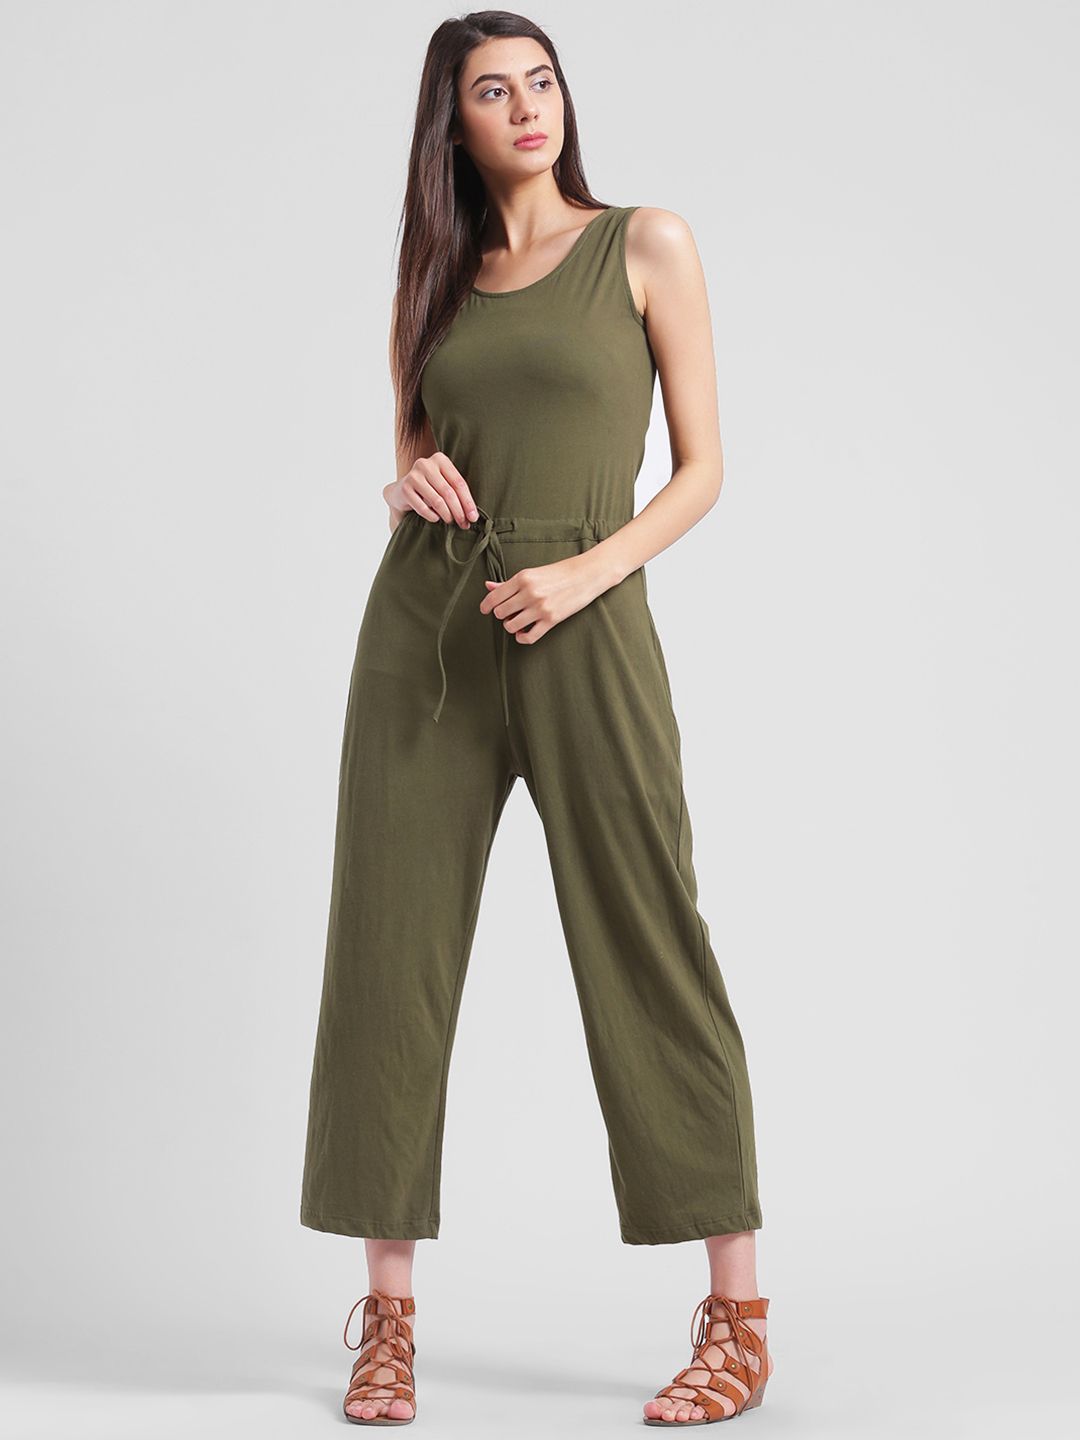 Rigo Olive Green Solid Basic Jumpsuit Price in India